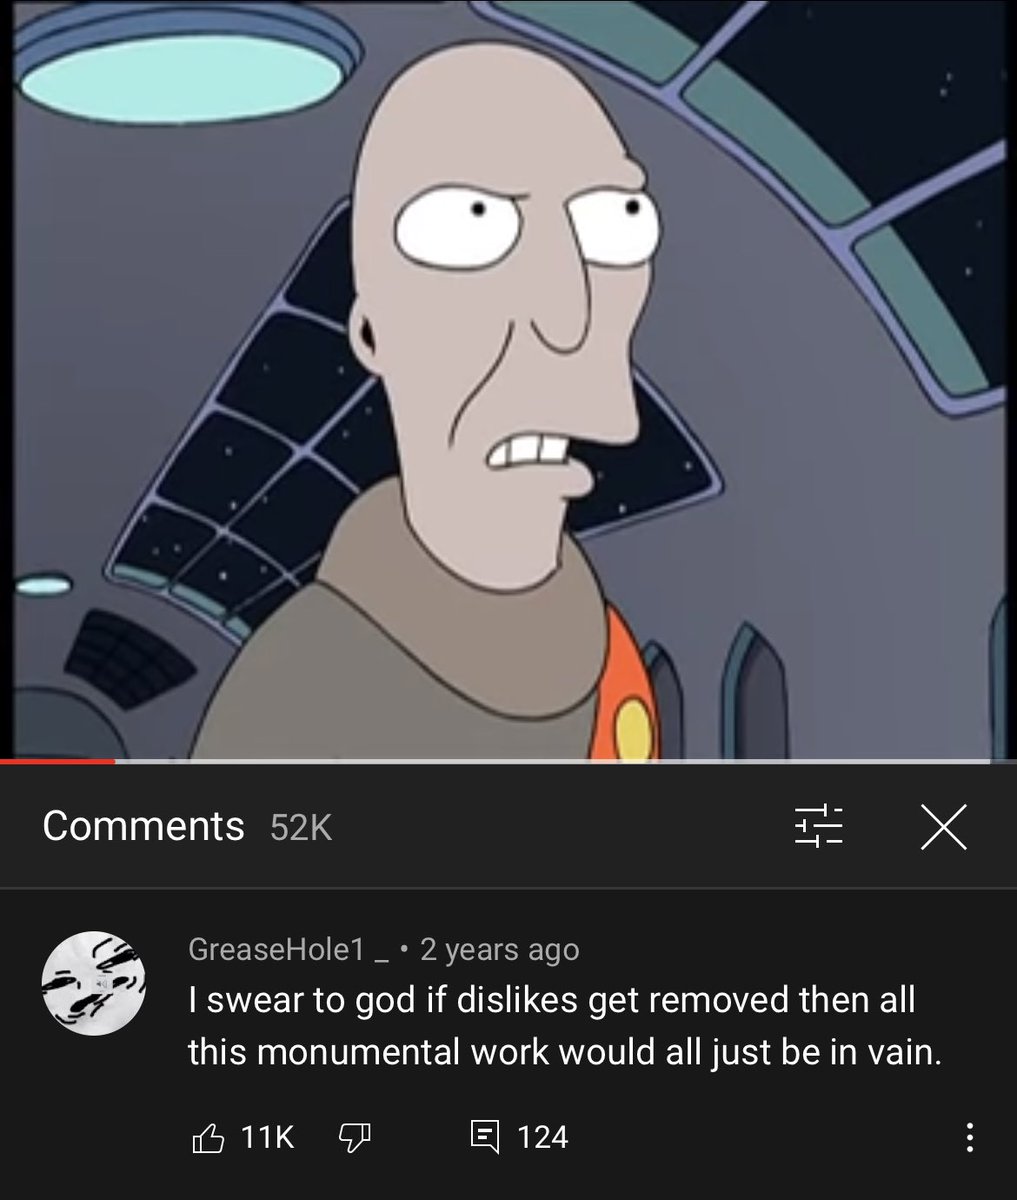 Posts that aged well - have no strong feelings one way - 52K x GreaseHole1 _ 2 years ago I swear to god if dis get removed then all this monumental work would all just be in vain. B 11K 124